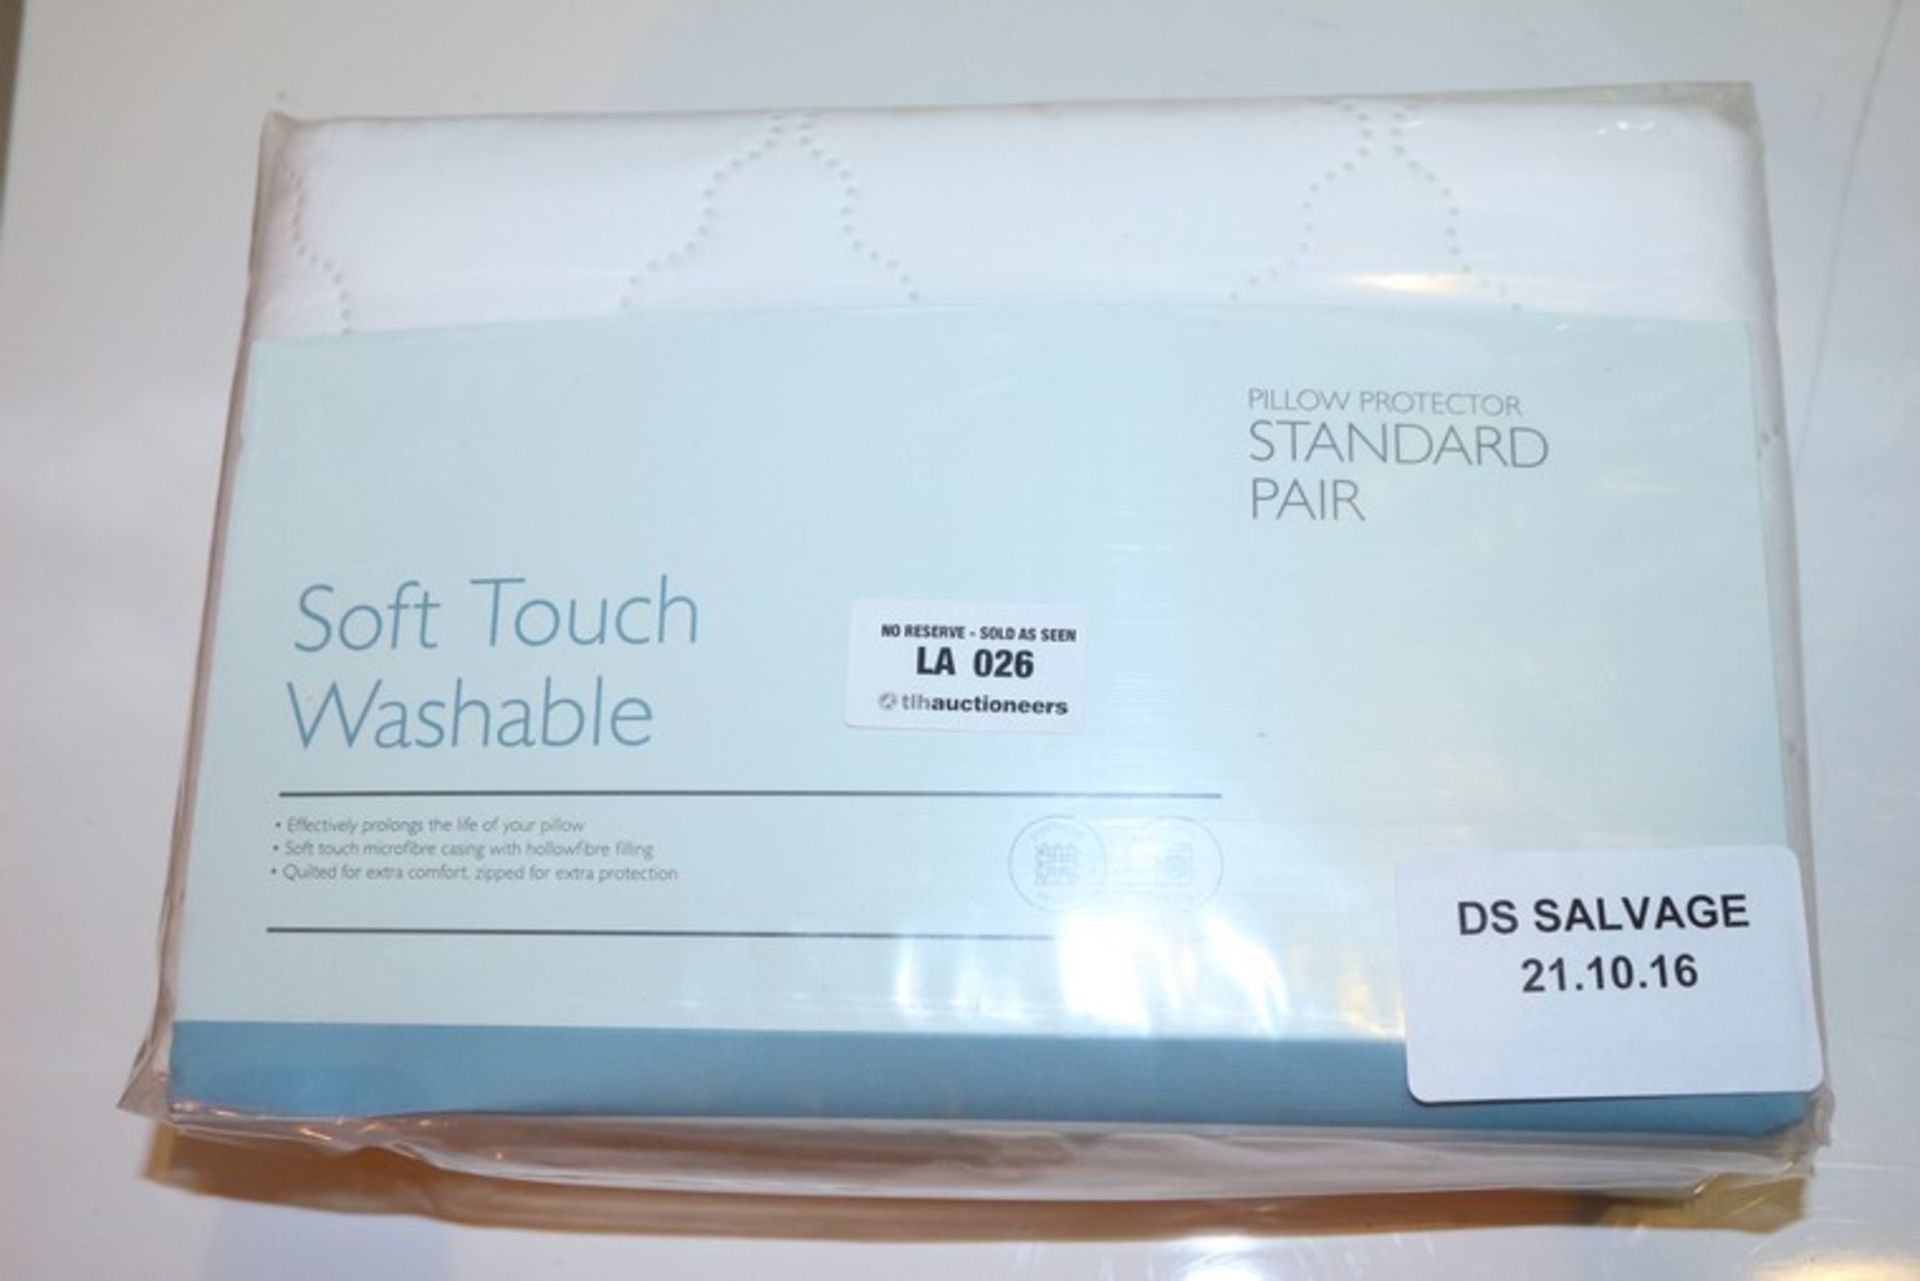 3 x BOXED SOFT TOUCH STANDARD PAIR PILLOW PROTECTORS *PLEASE NOTE THAT THE BID PRICE IS MULTIPLIED